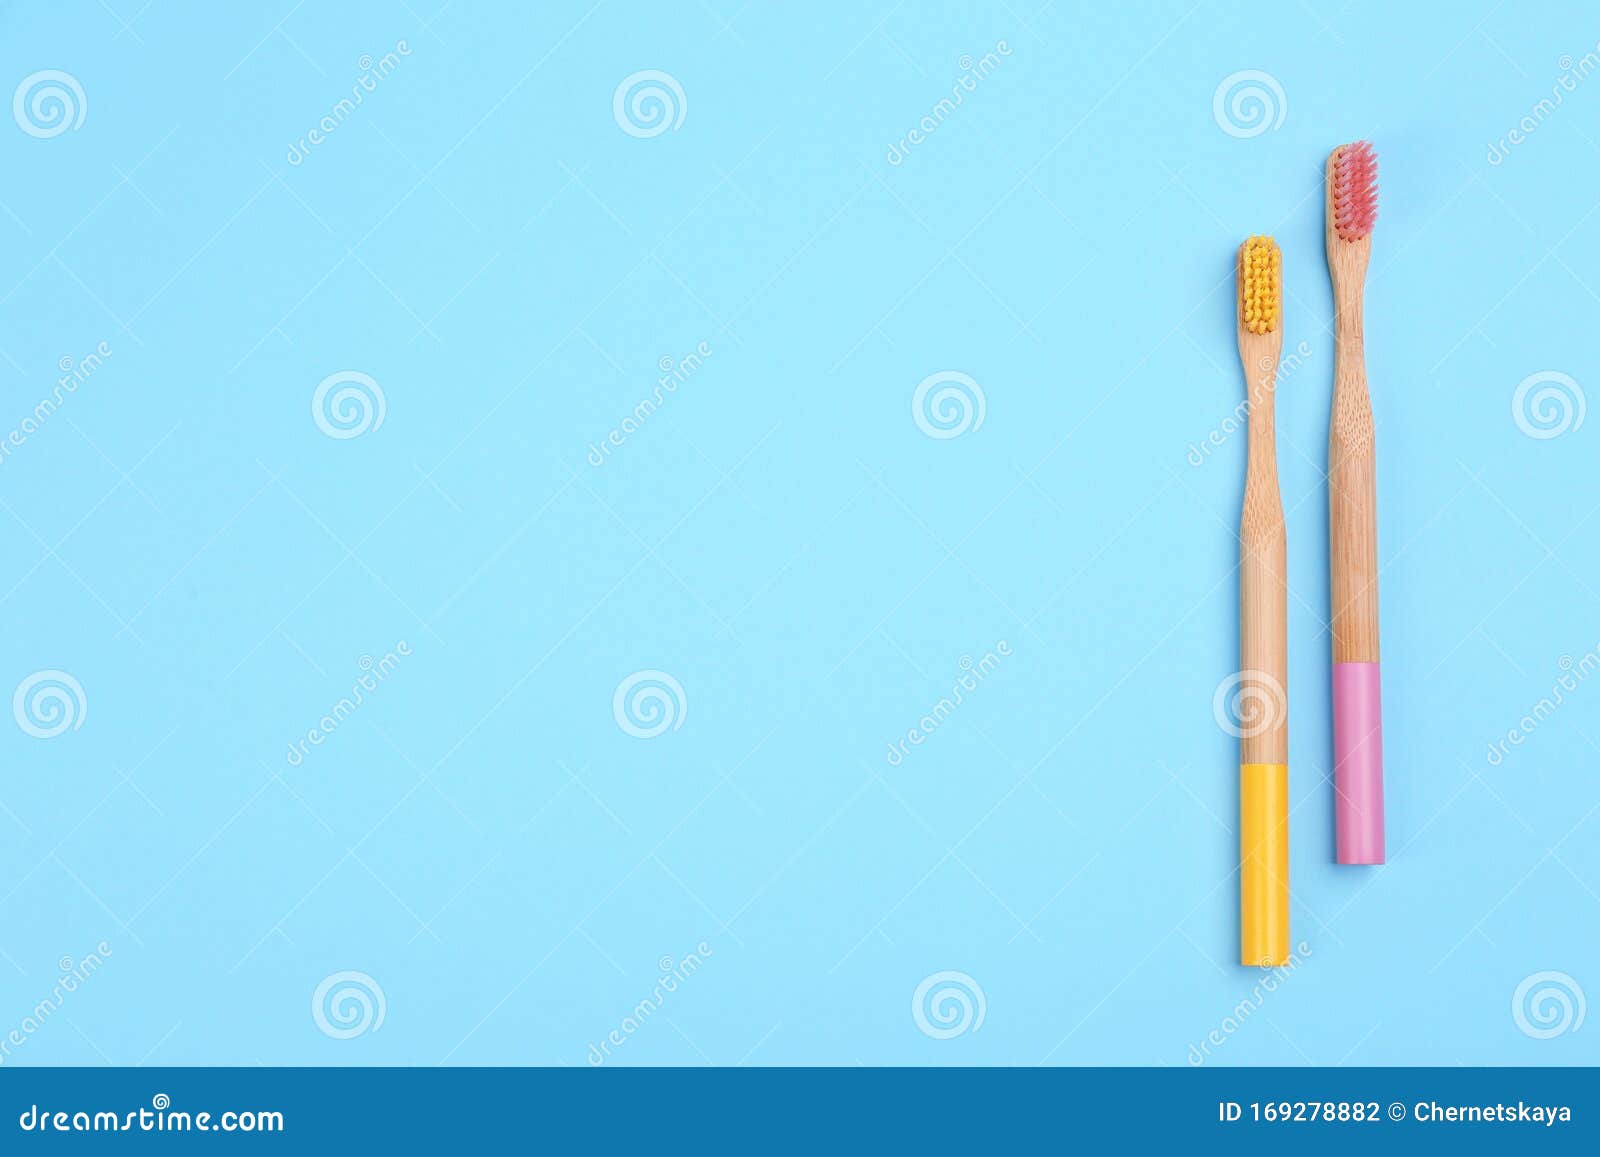 Toothbrushes Made of Bamboo on Light Blue Background, Flat Lay. Space ...